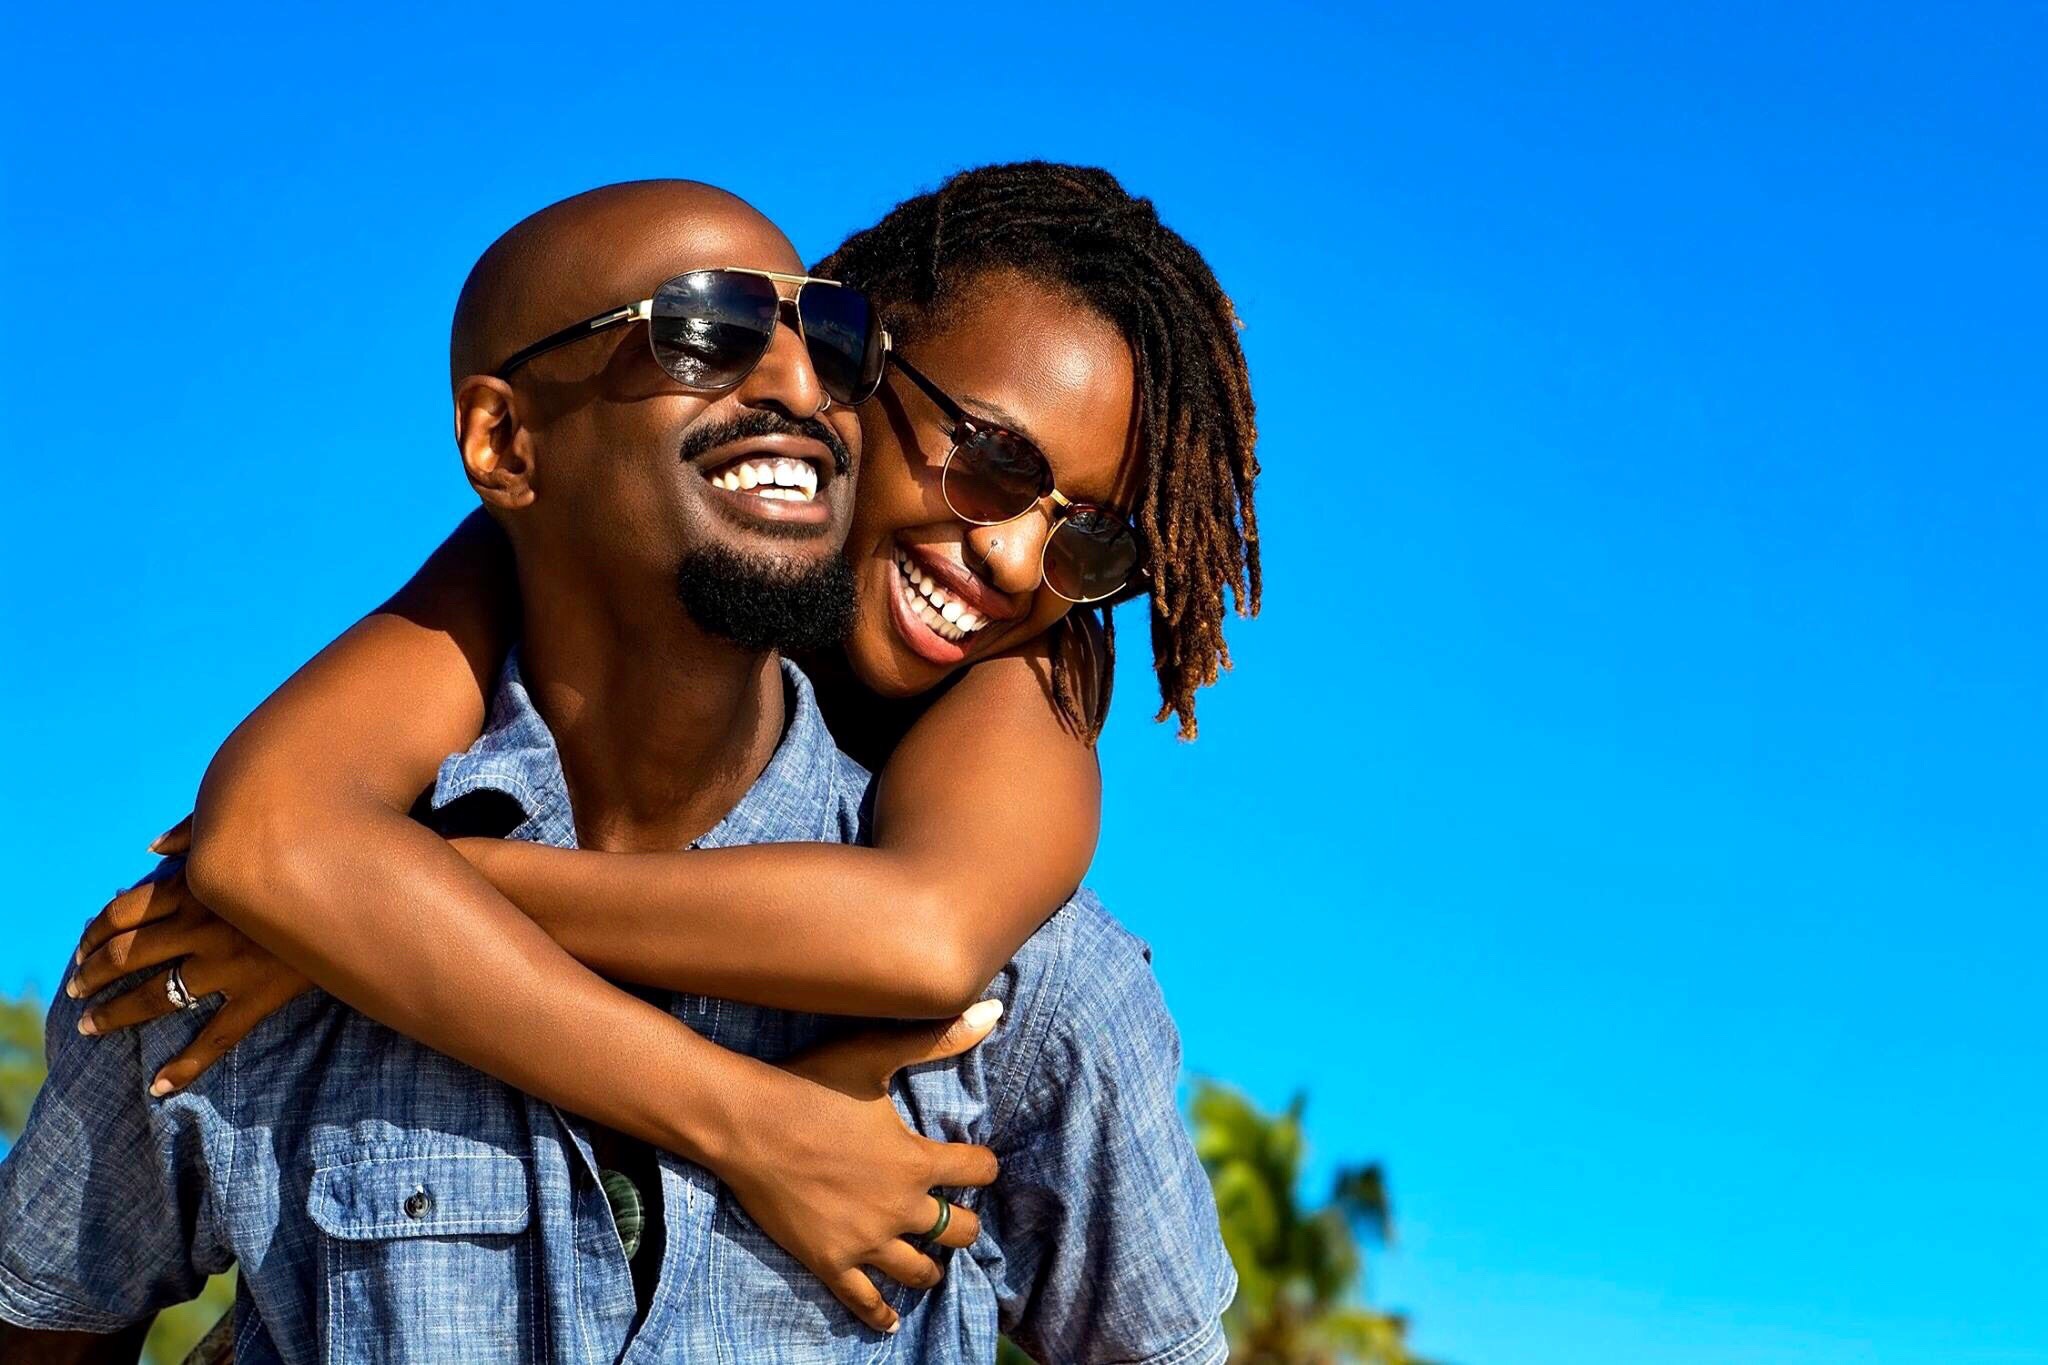 The Black Expat: 'We're Married And Living Abroad In Asia'